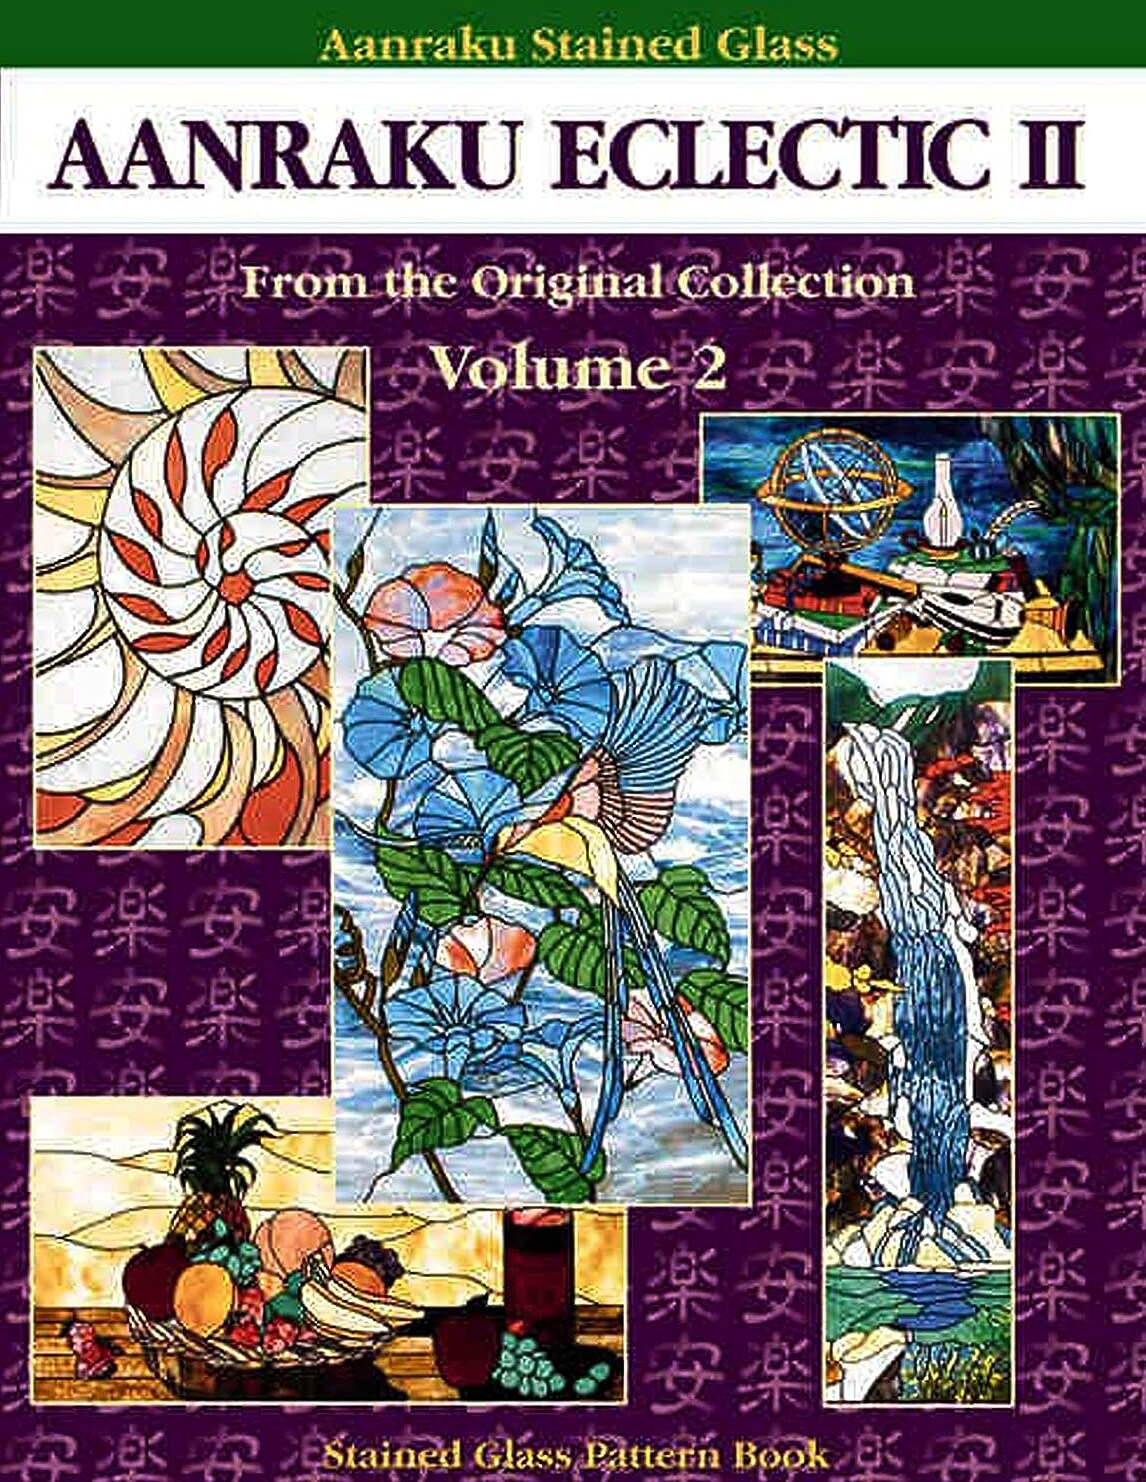 Stained Glass Pattern Book: Aanraku Eclectic Stained Glass Pattern Book Volume 2